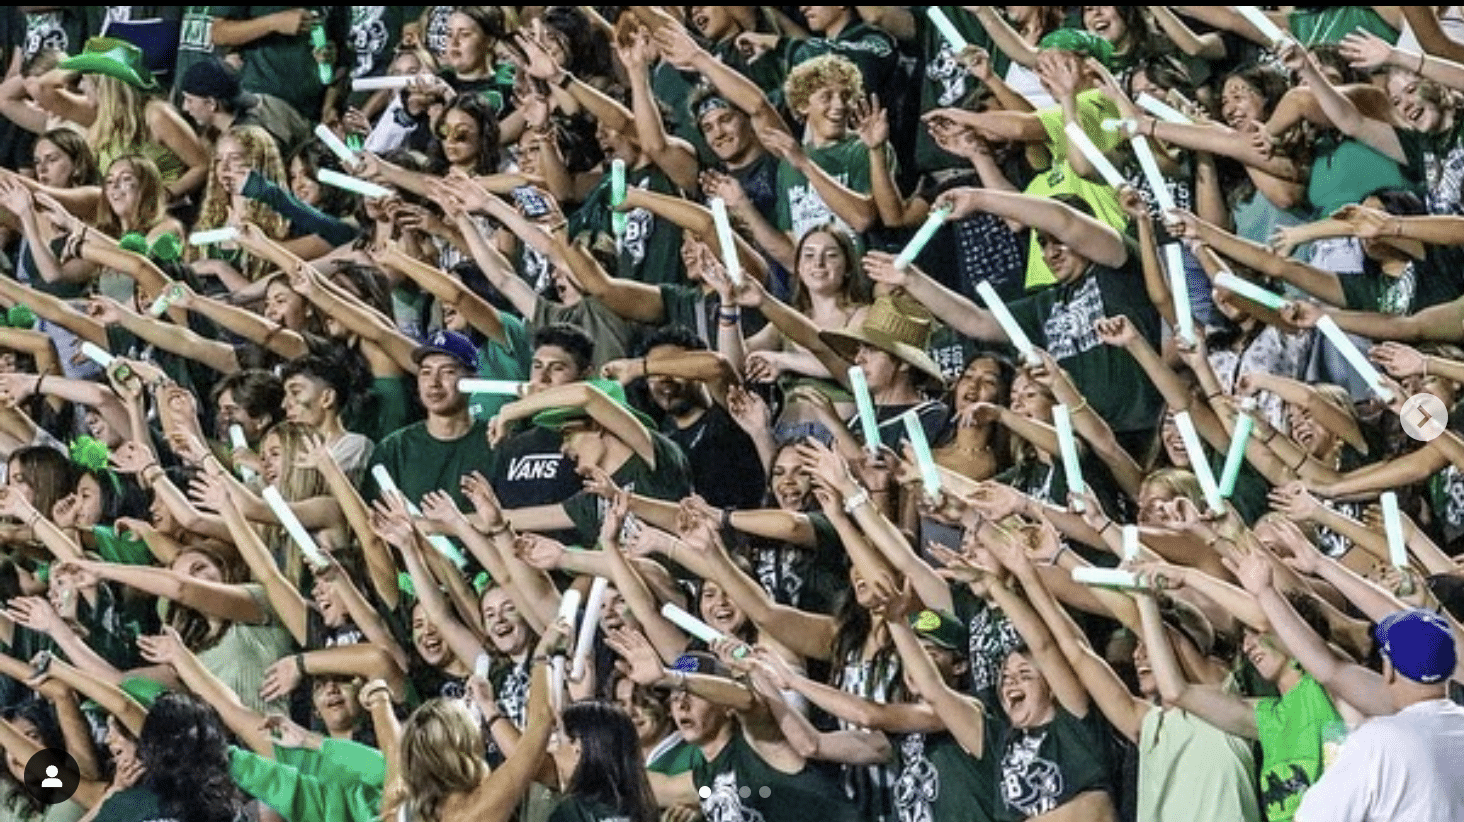 Bonita High School student section, wearing green and white school colors, enthusiastically cheers at a football game while waving glow sticks. Student leaders at the front lead the spirited cheer.